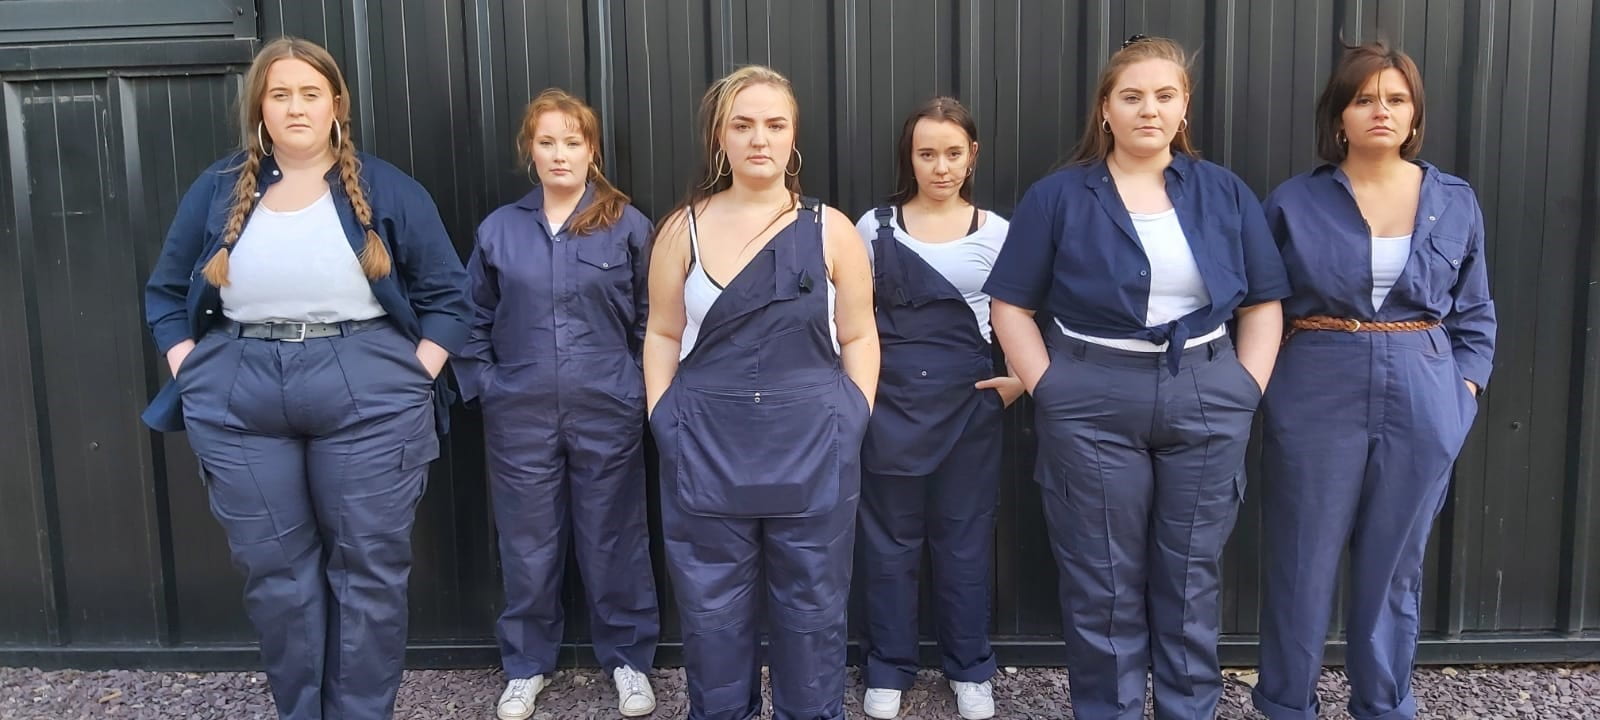 Image contains six women standing face on to the camera, looking serious. All dressed in men's workwear.